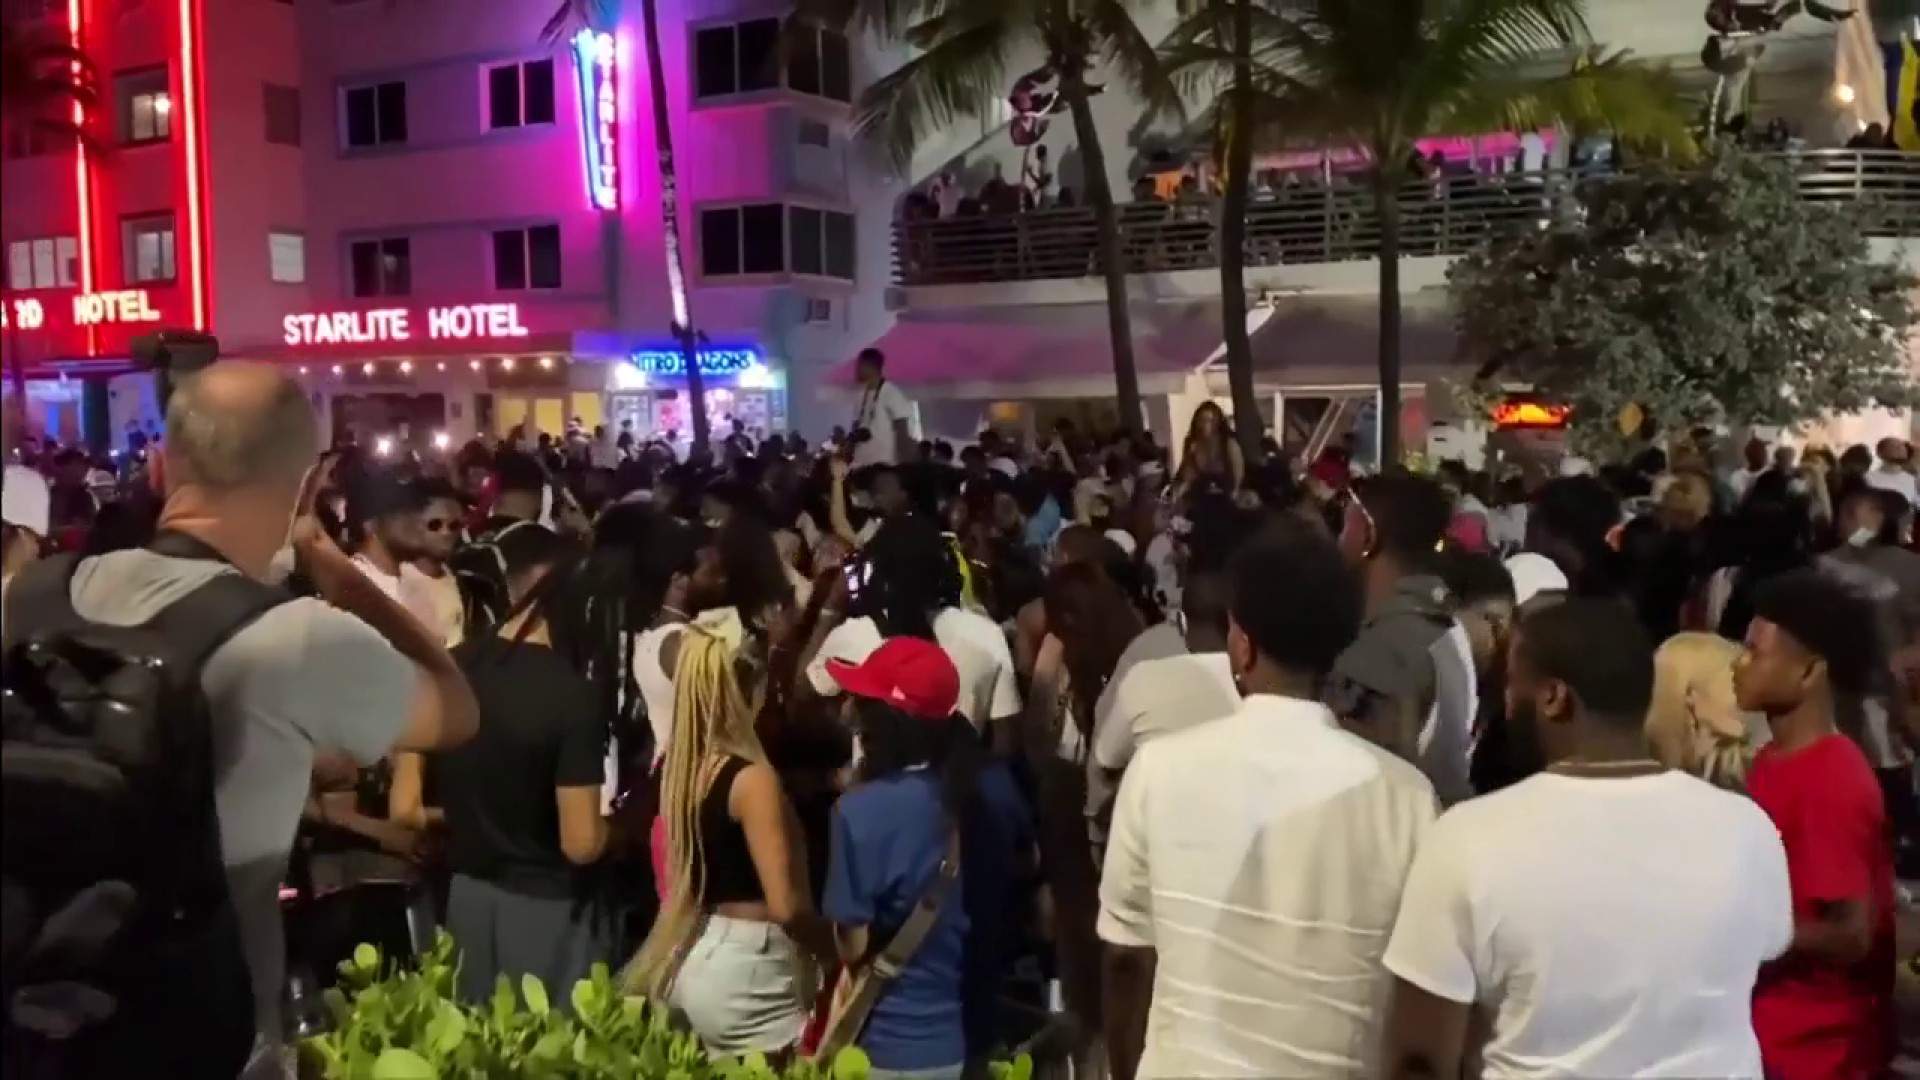 Police chief says Miami partying 'couldn’t go on any longer'